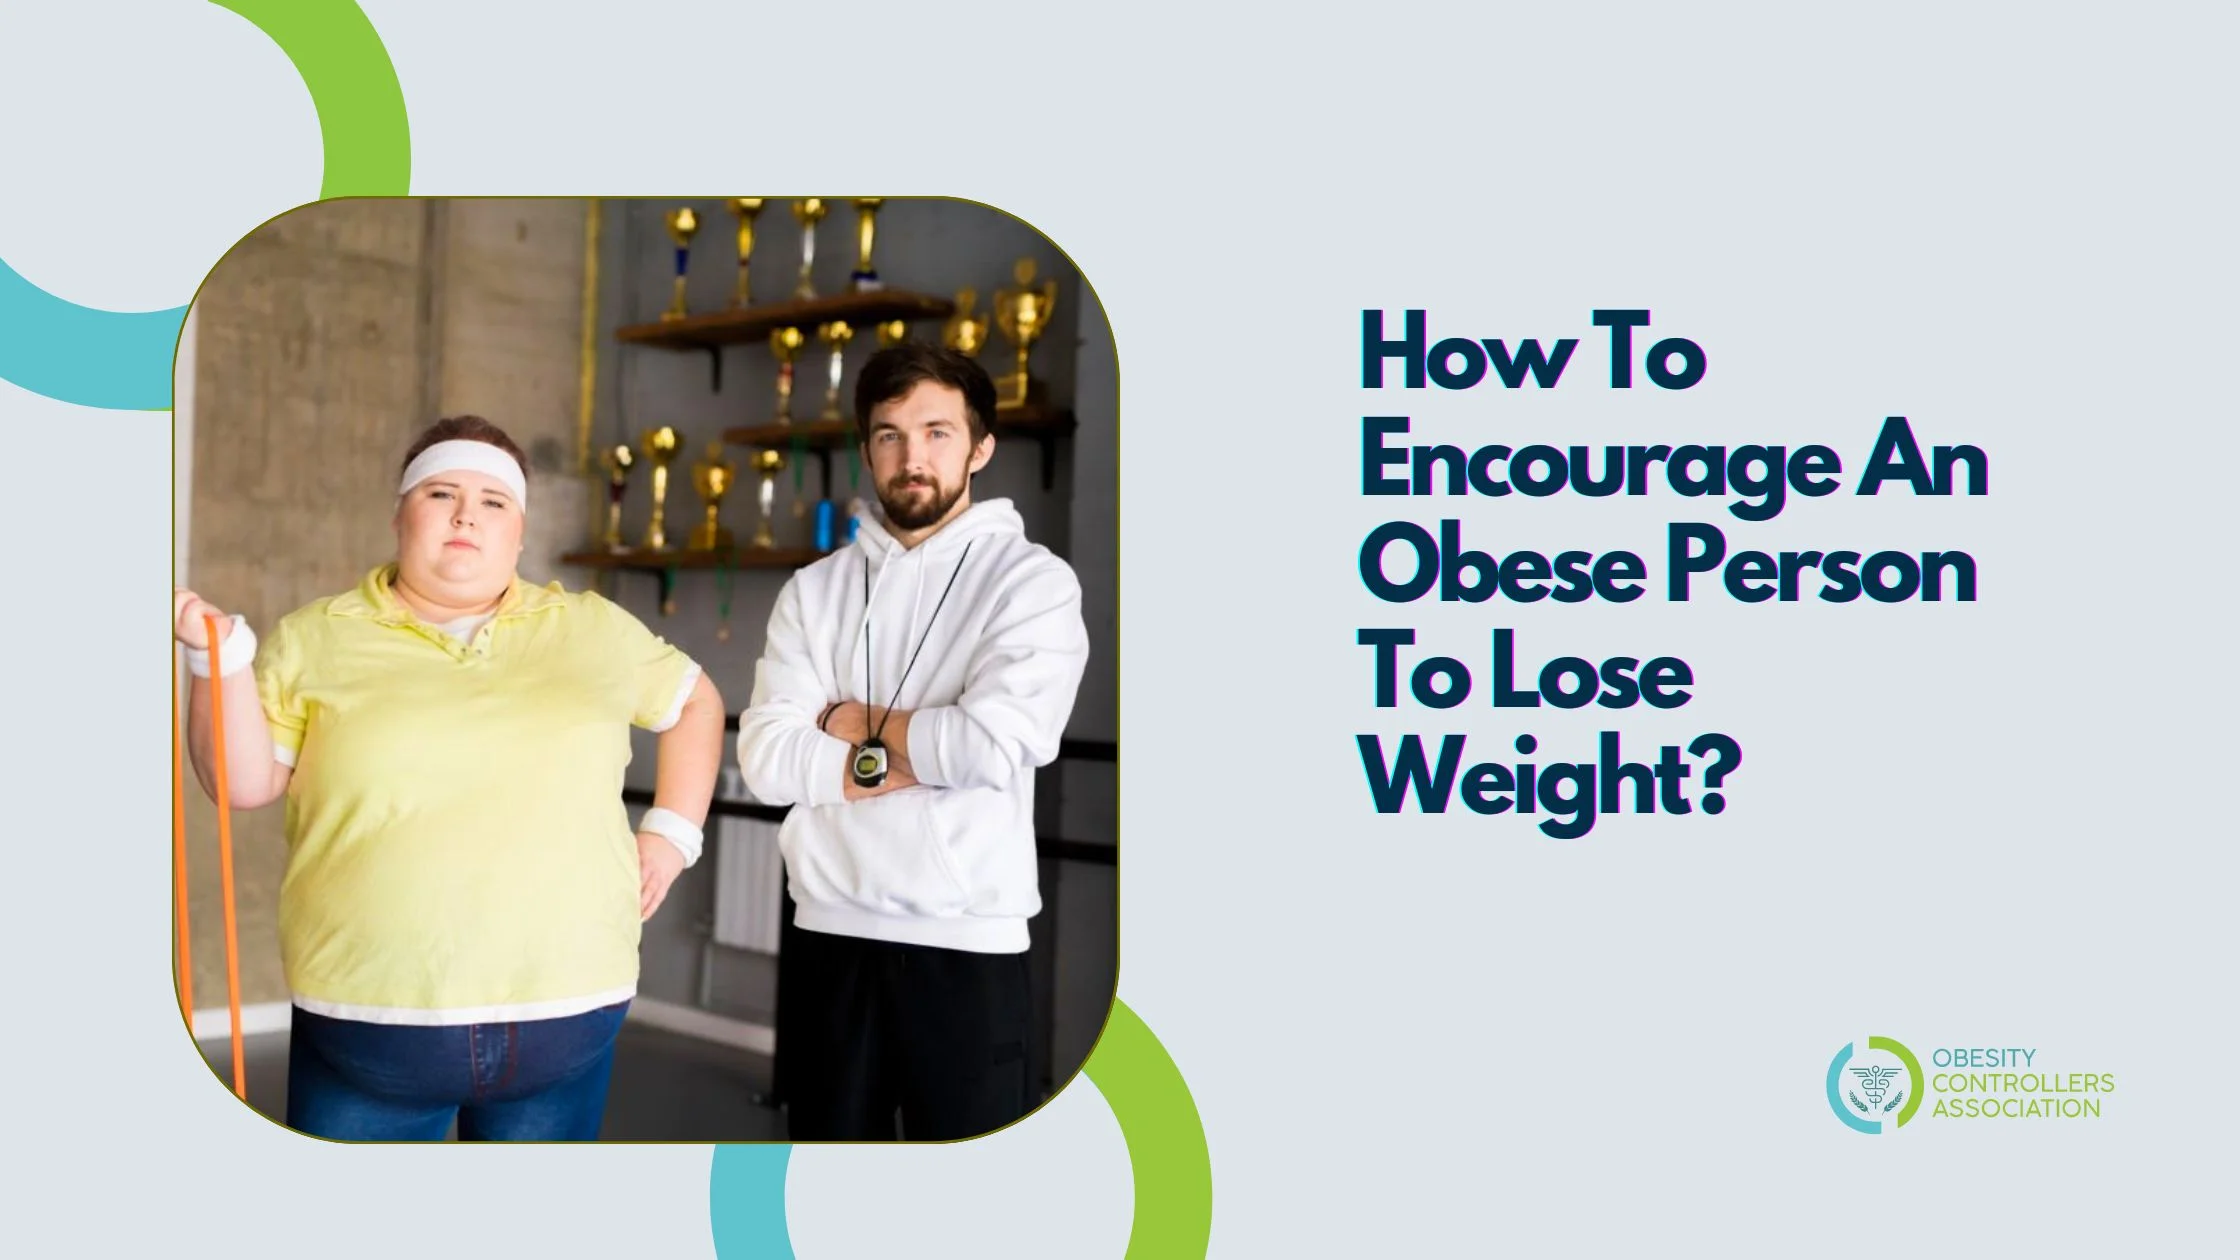 Encourage An Obese Person To Lose Weight